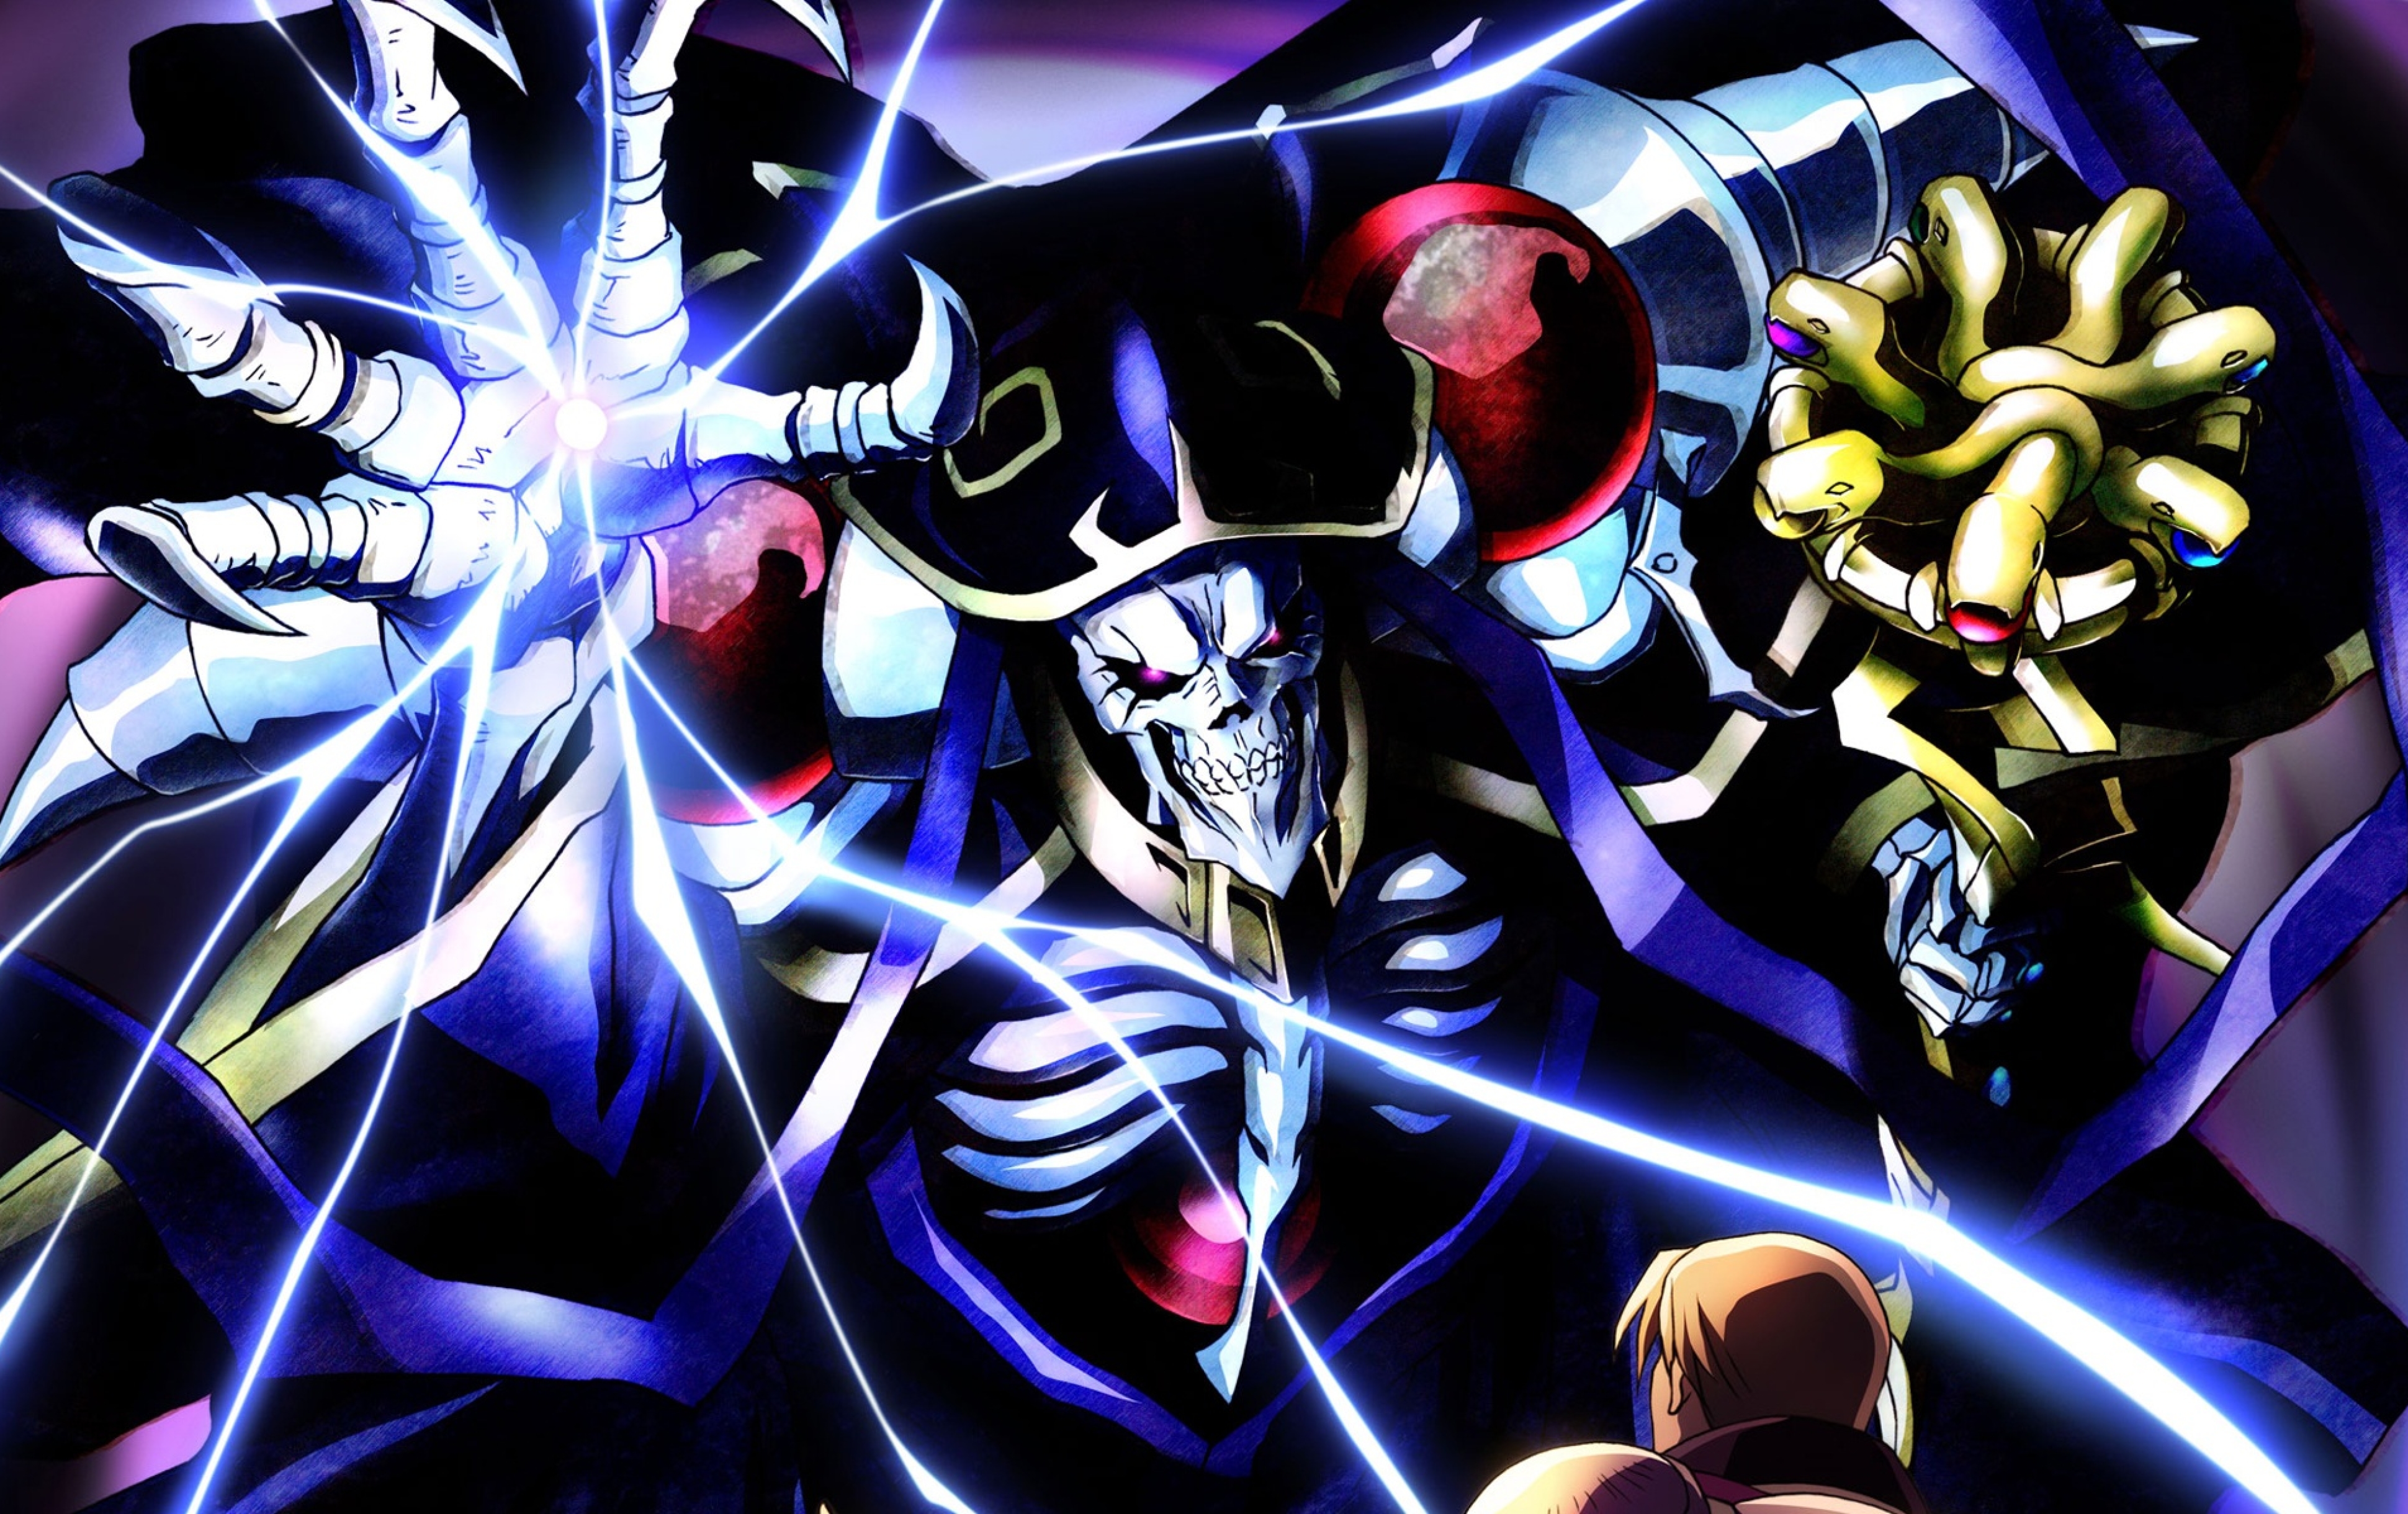 Overlord Ainz Ooal Gown Al' Poster by canadaposter | Displate | Anime  wallpaper 1920x1080, Anime wallpaper, Anime wallpaper phone